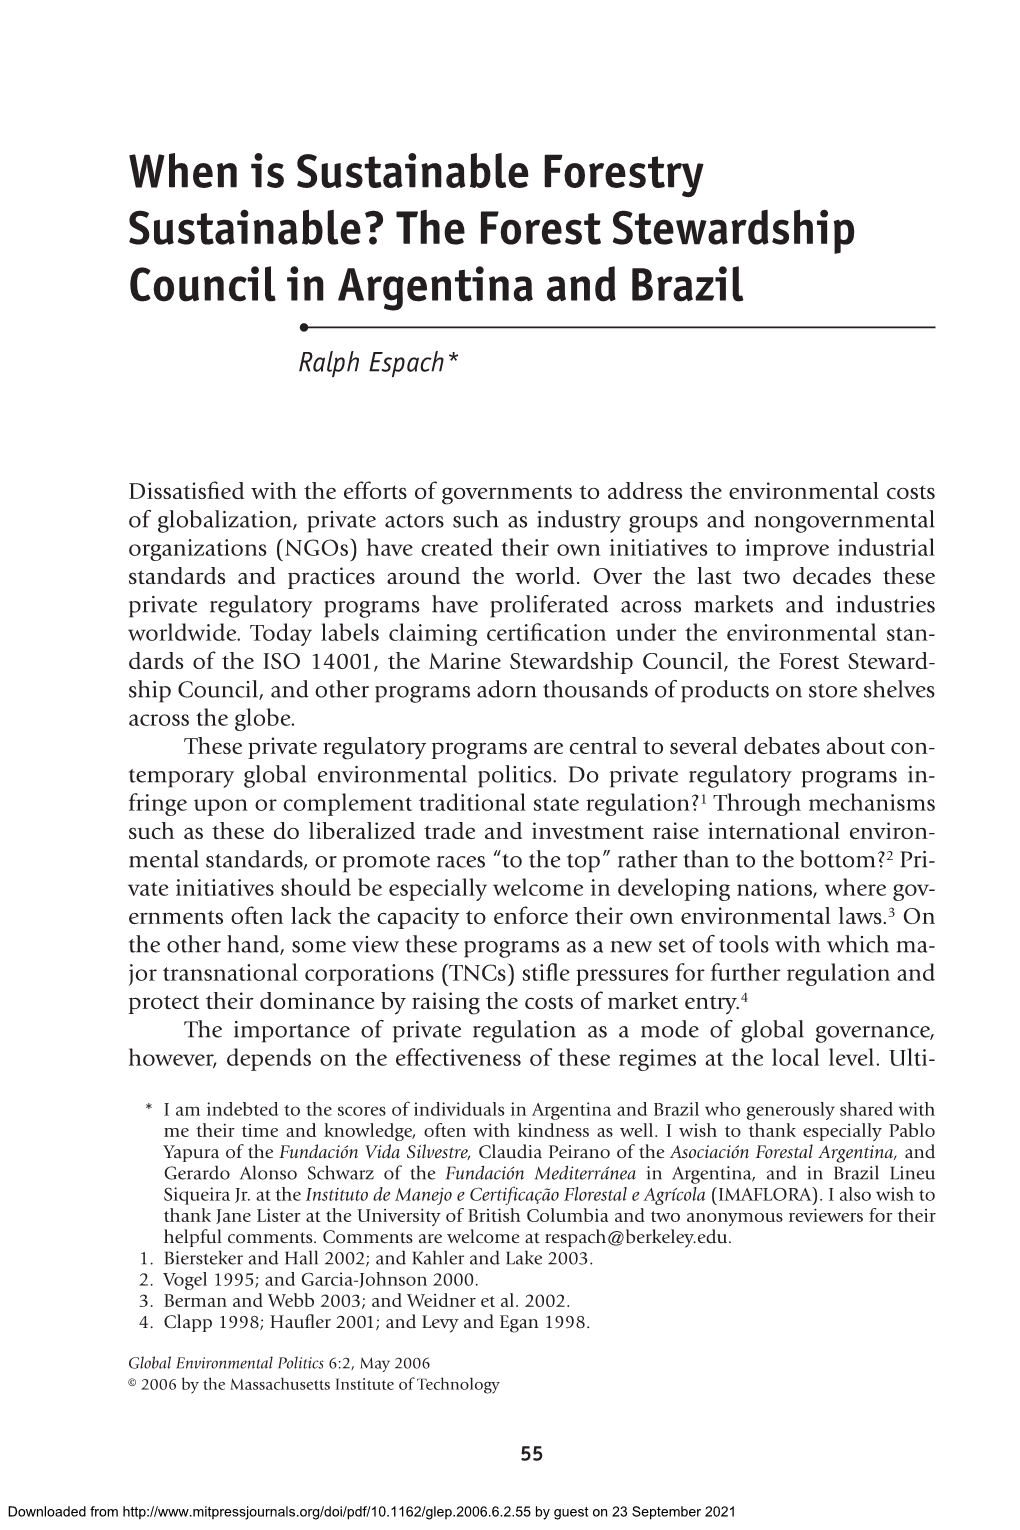 When Is Sustainable Forestry Sustainable? the Forest Stewardship Council in Argentina and Brazil • Ralph Espach*